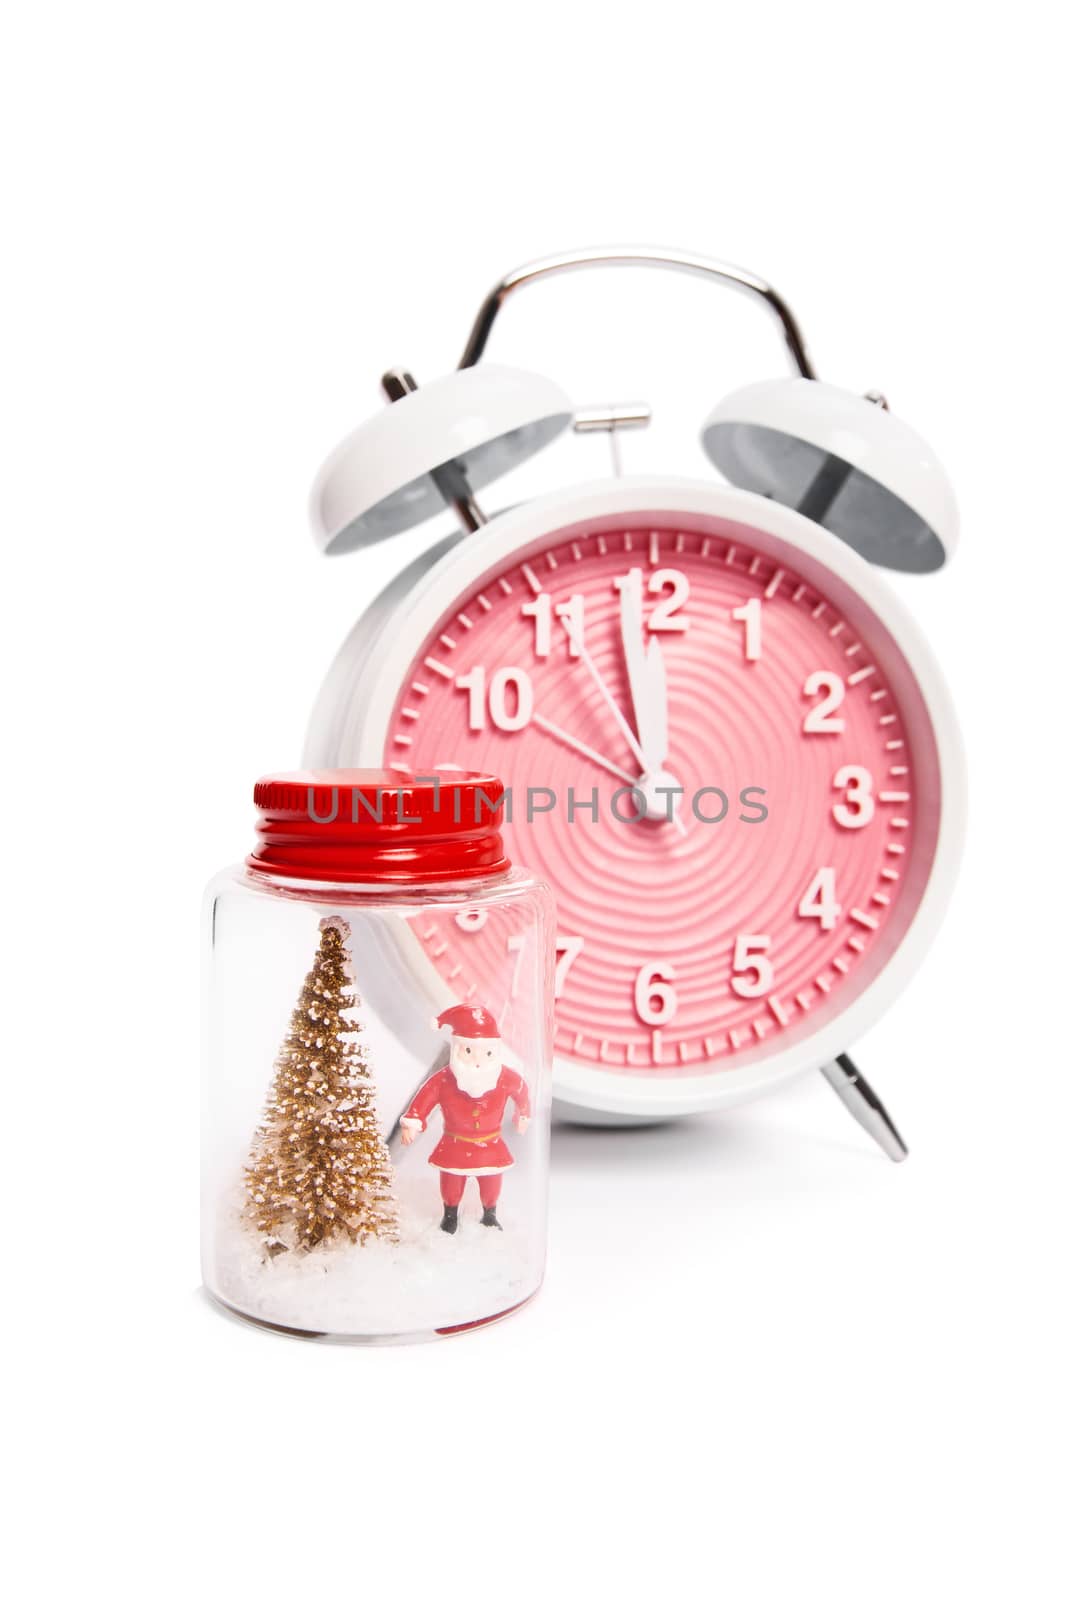 Festive alarm clock and a Christmas ornament with Santa Claus by Mendelex